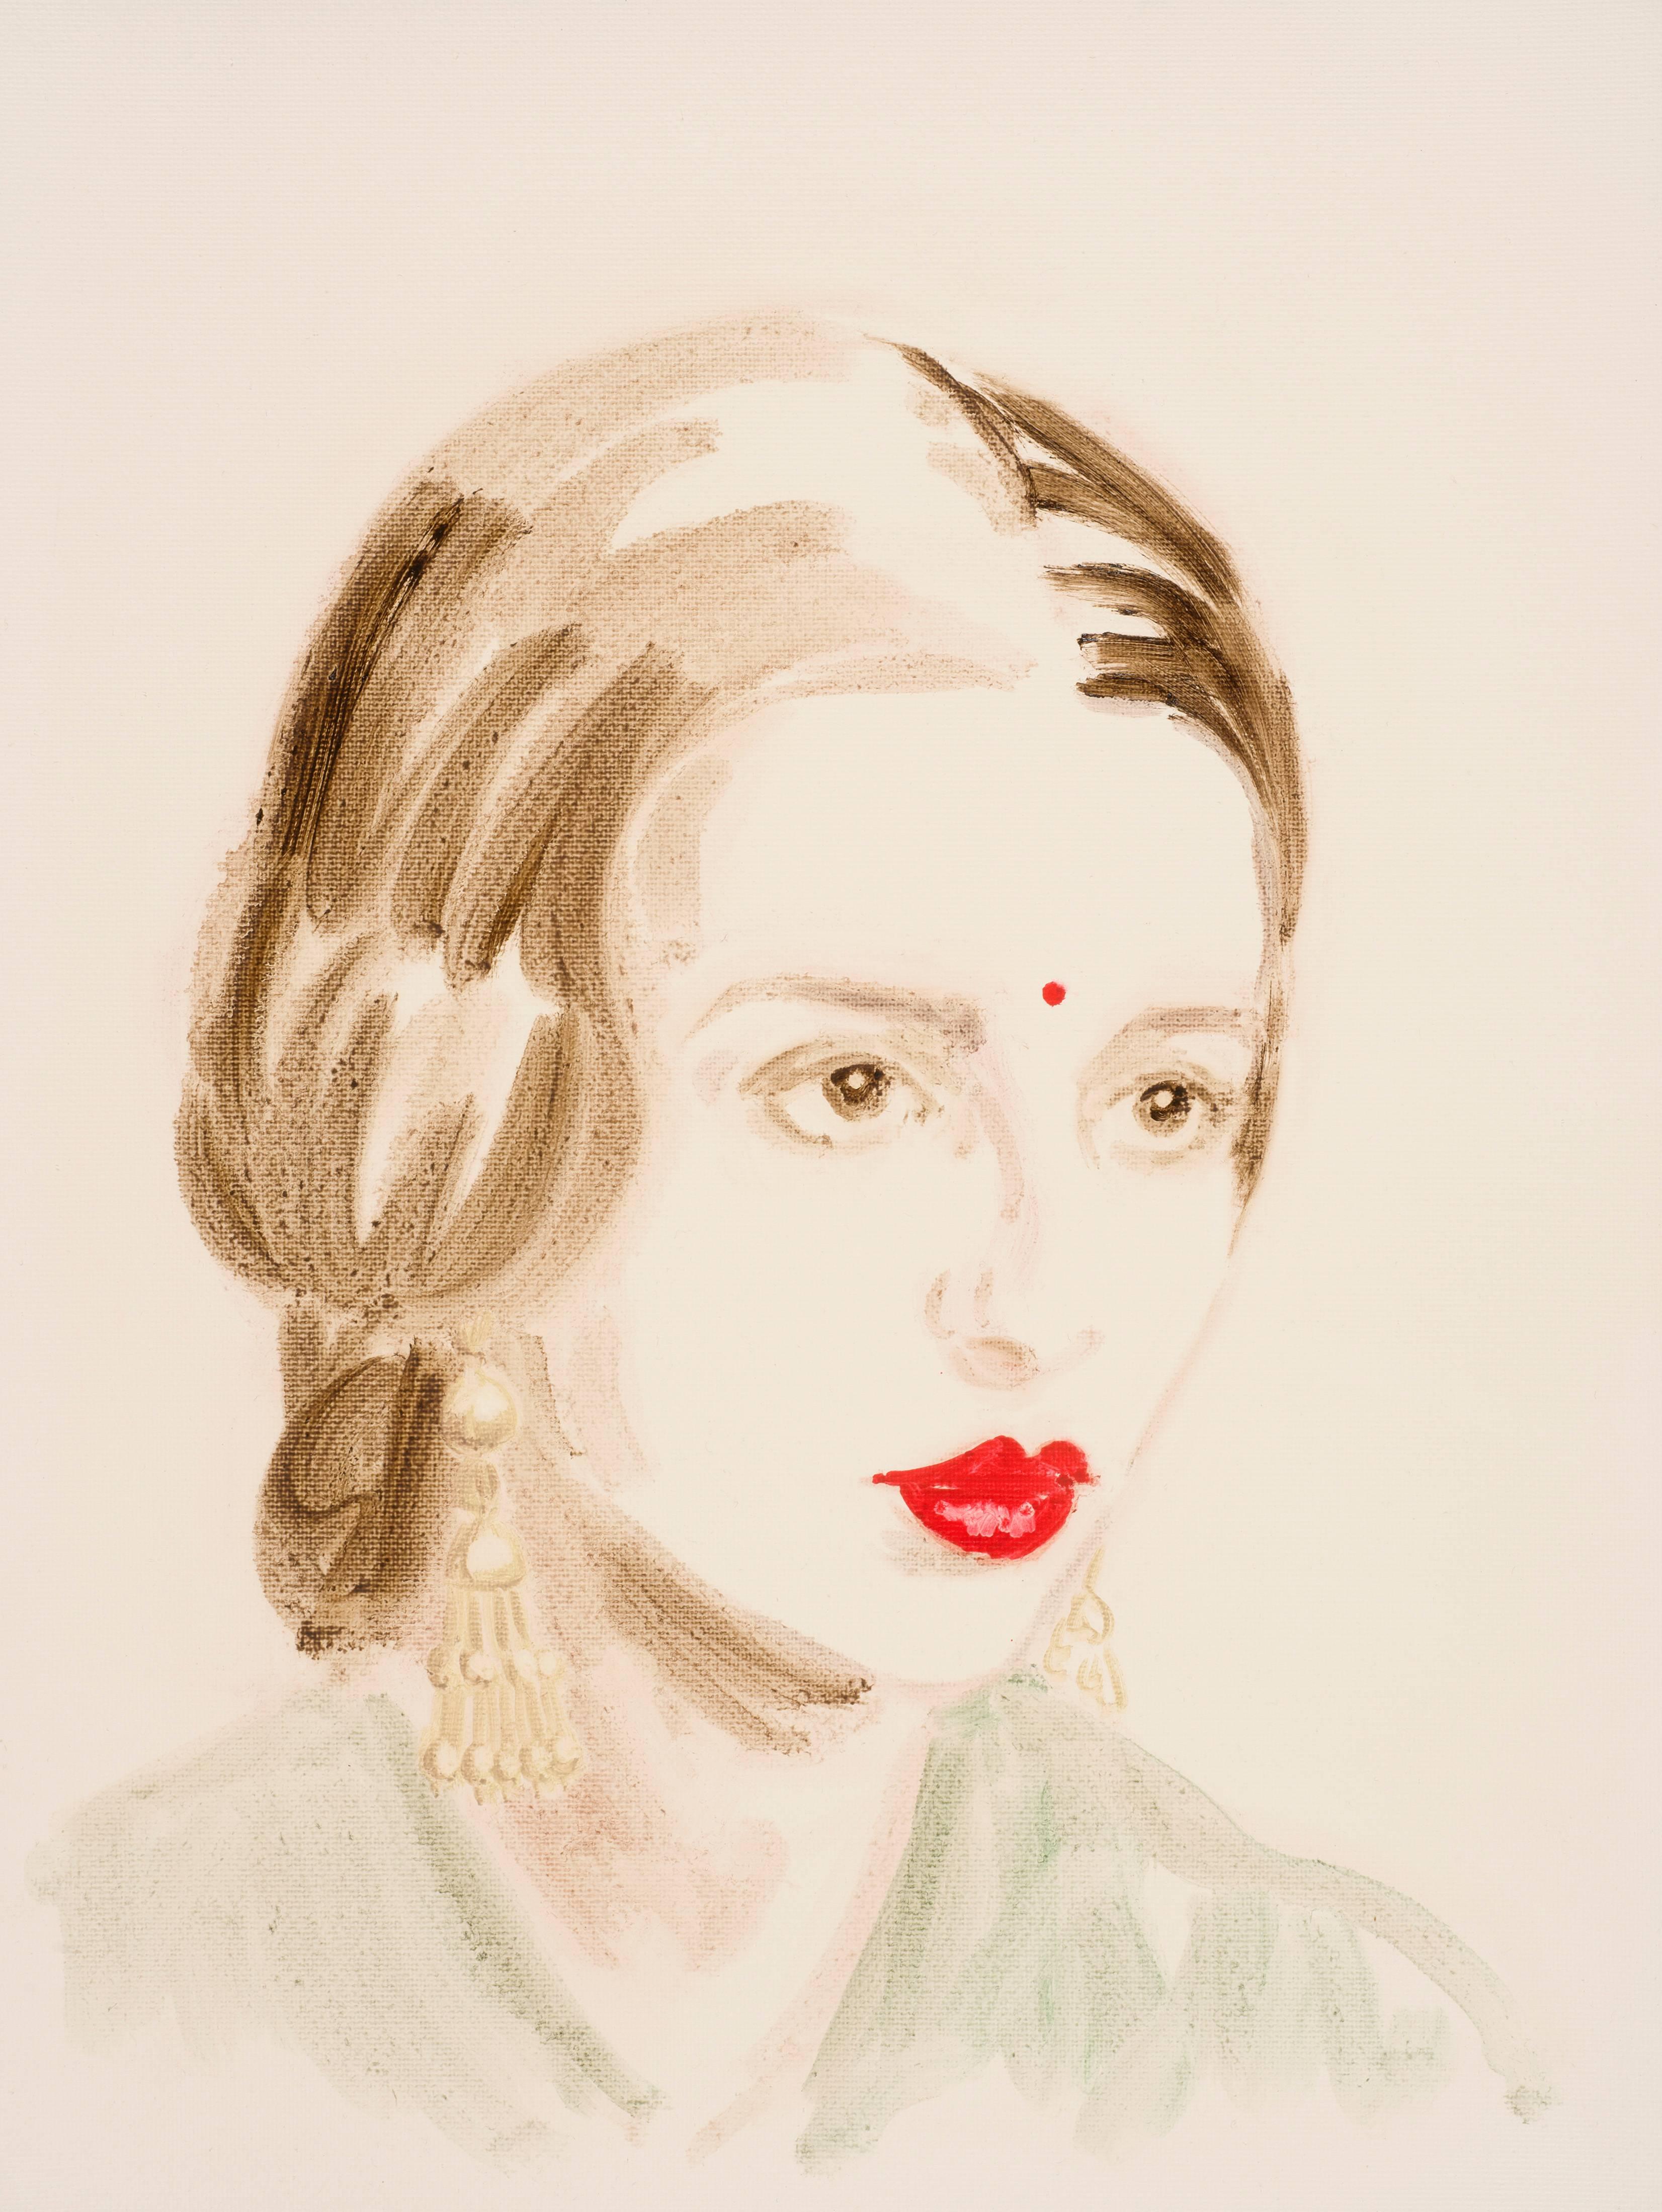 Annie Kevans Portrait Painting - Amrita Sher-Gil from the series "The History of Art"